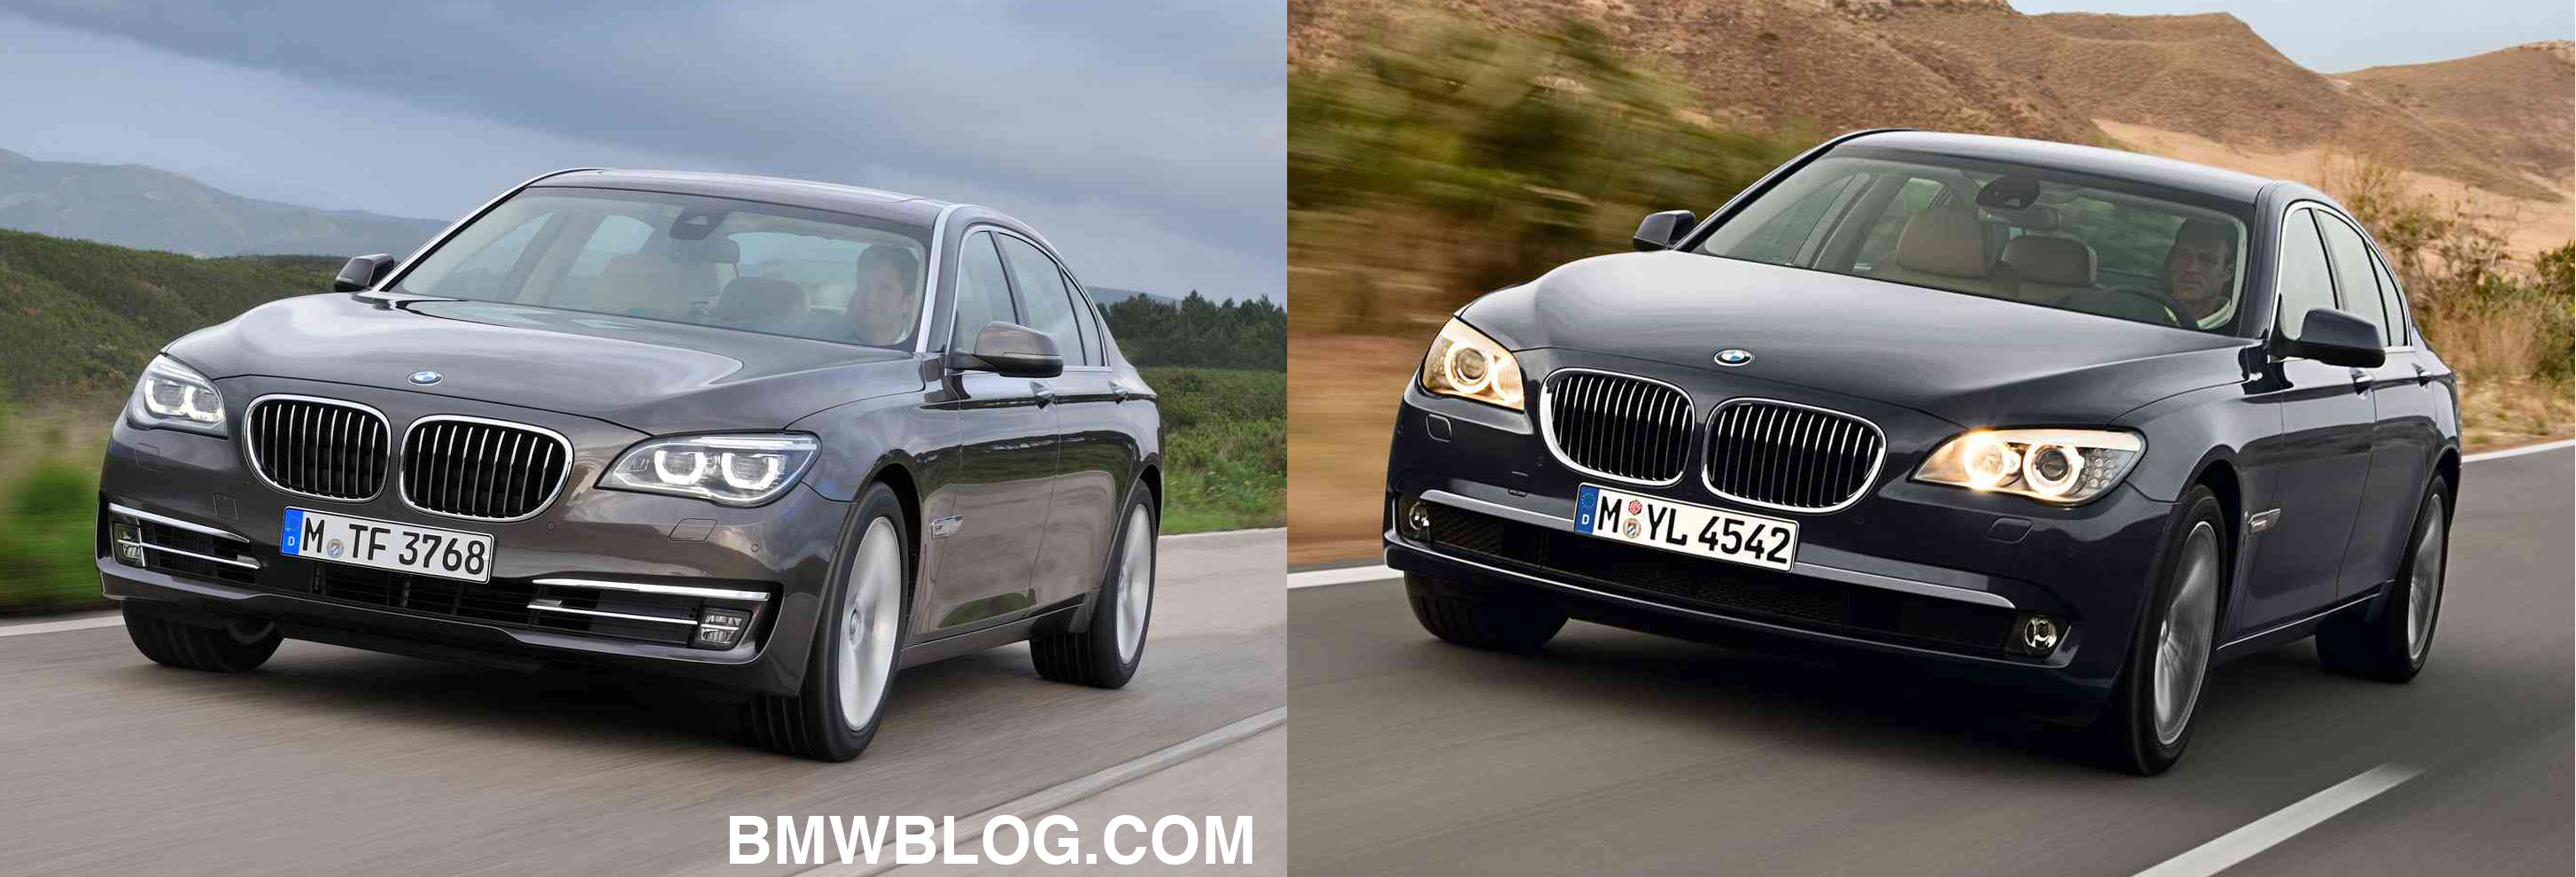 What is the difference between bmw 750li and 760li #4